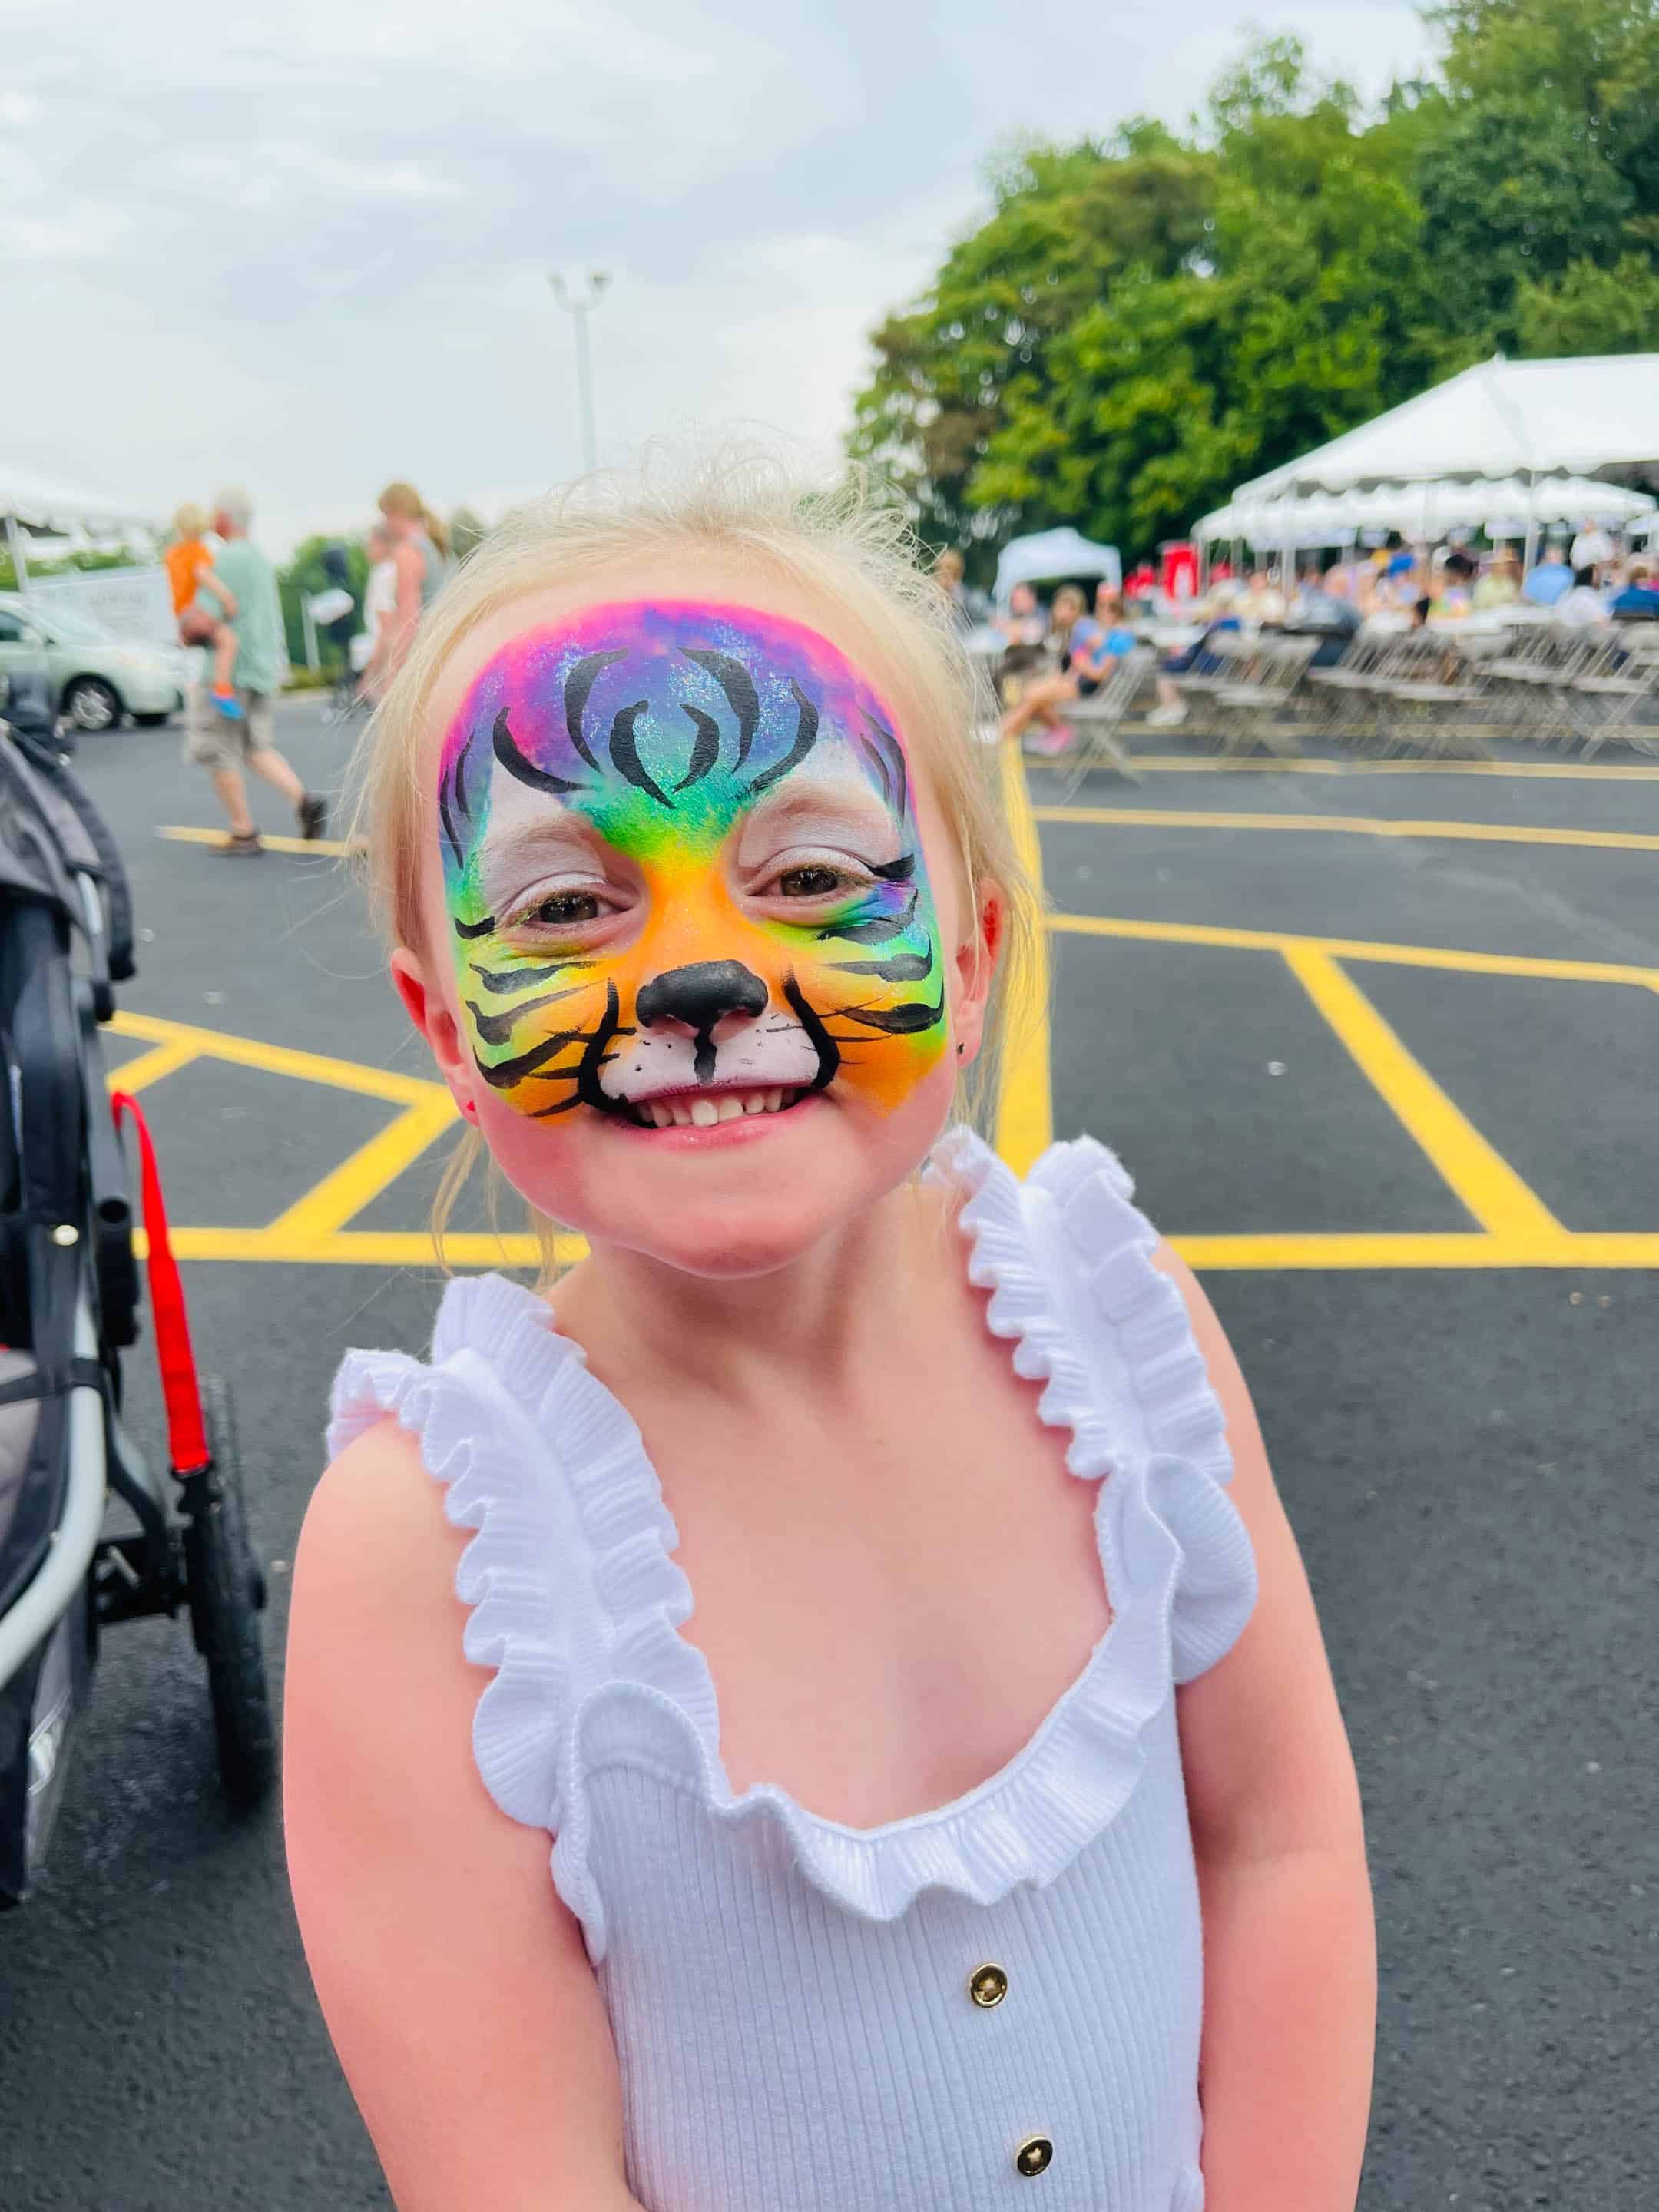 Get your daily dose of color and cuteness with these face paint videos! 🌈  The kids are just the sweetest! 😍